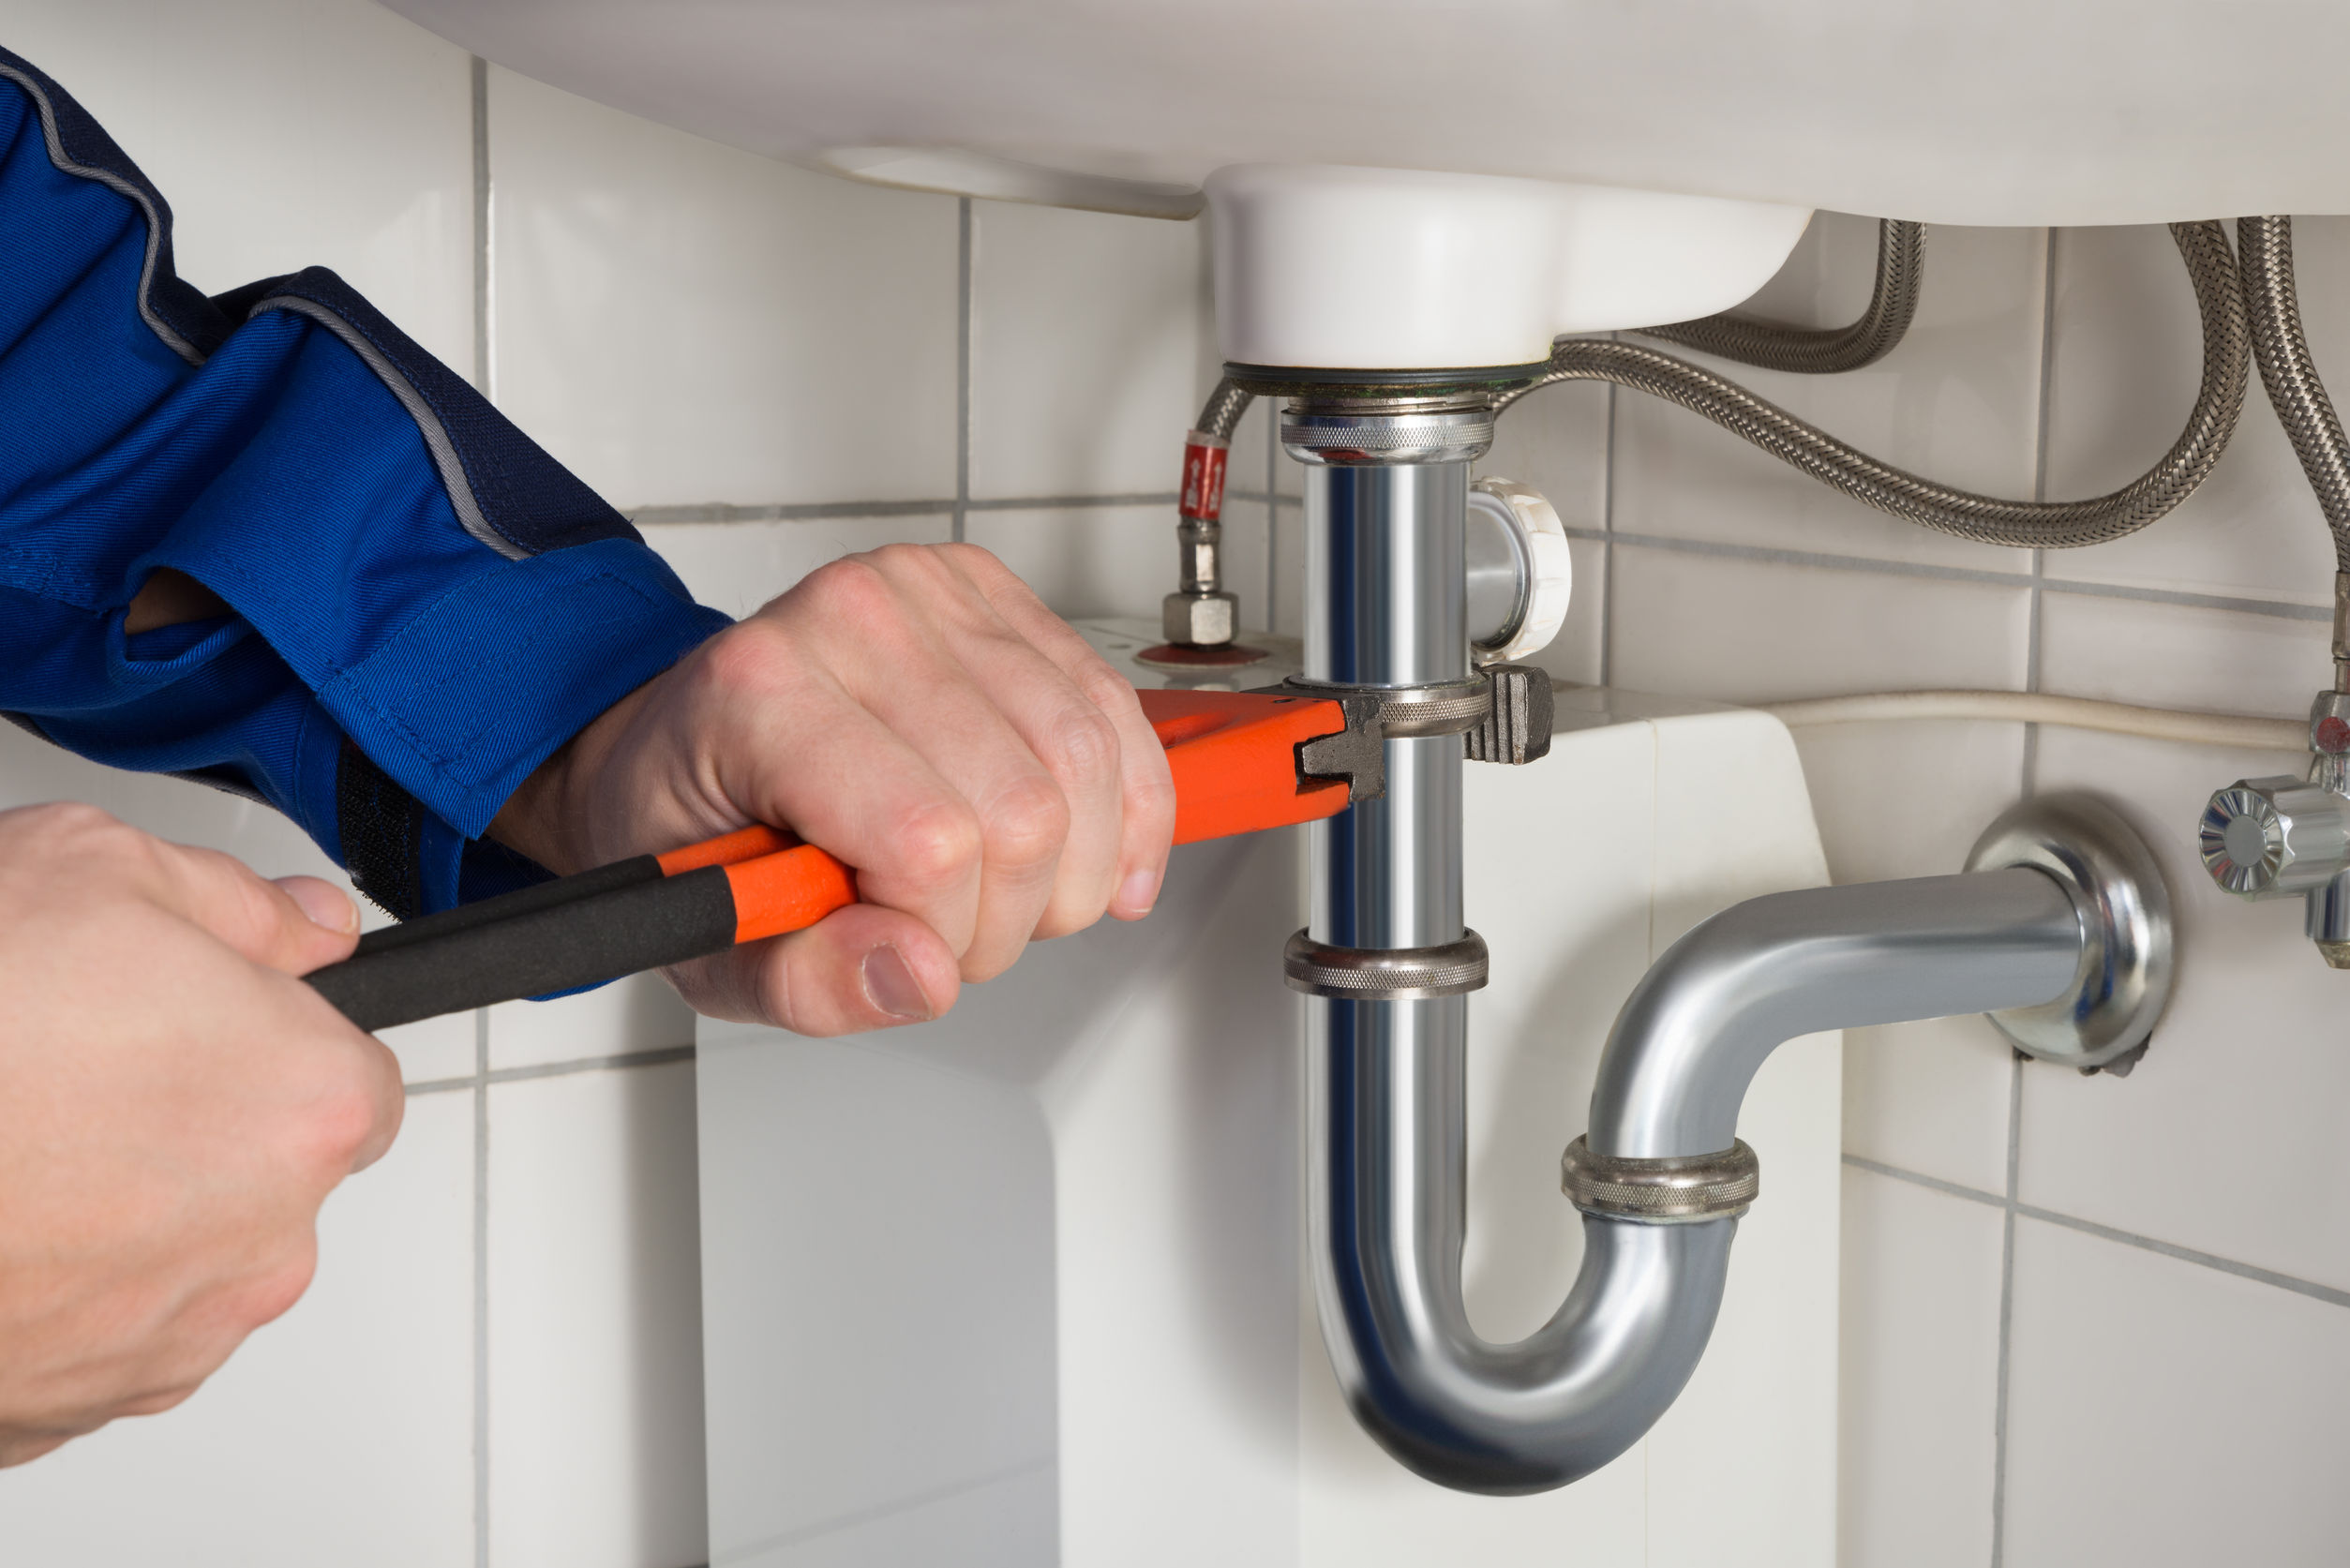 4 Important Tips to Consider When Hiring a Plumber